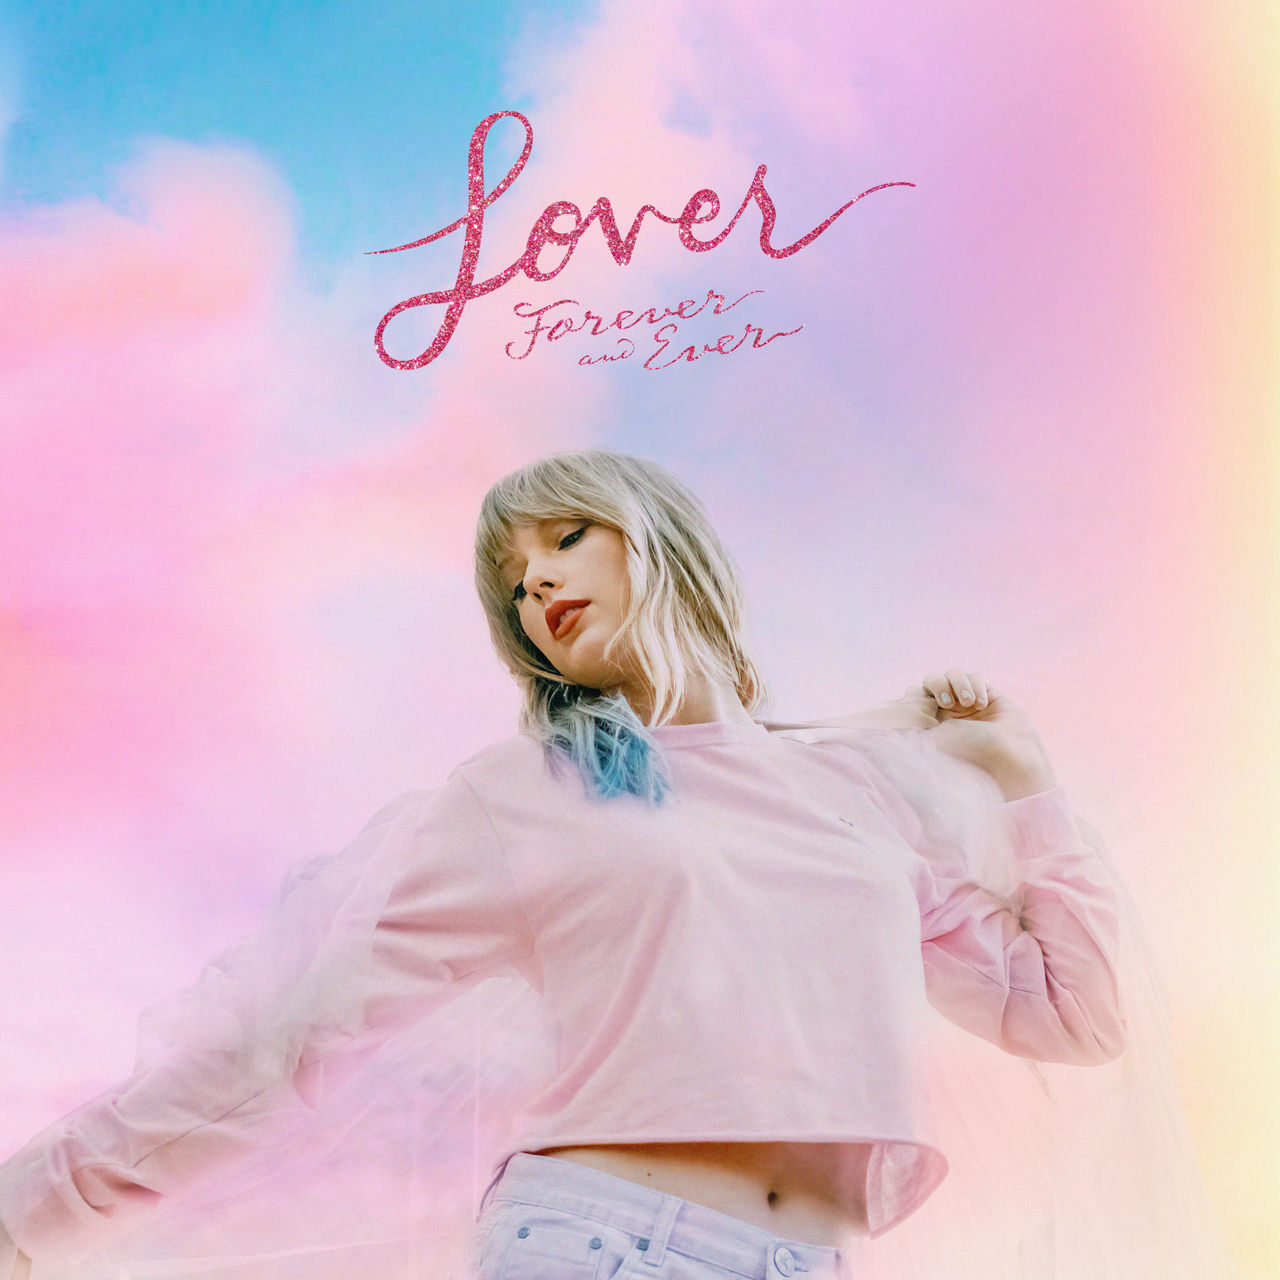 Taylor Swift Lover Forever and Ever Edition. by KallumLavigne on DeviantArt